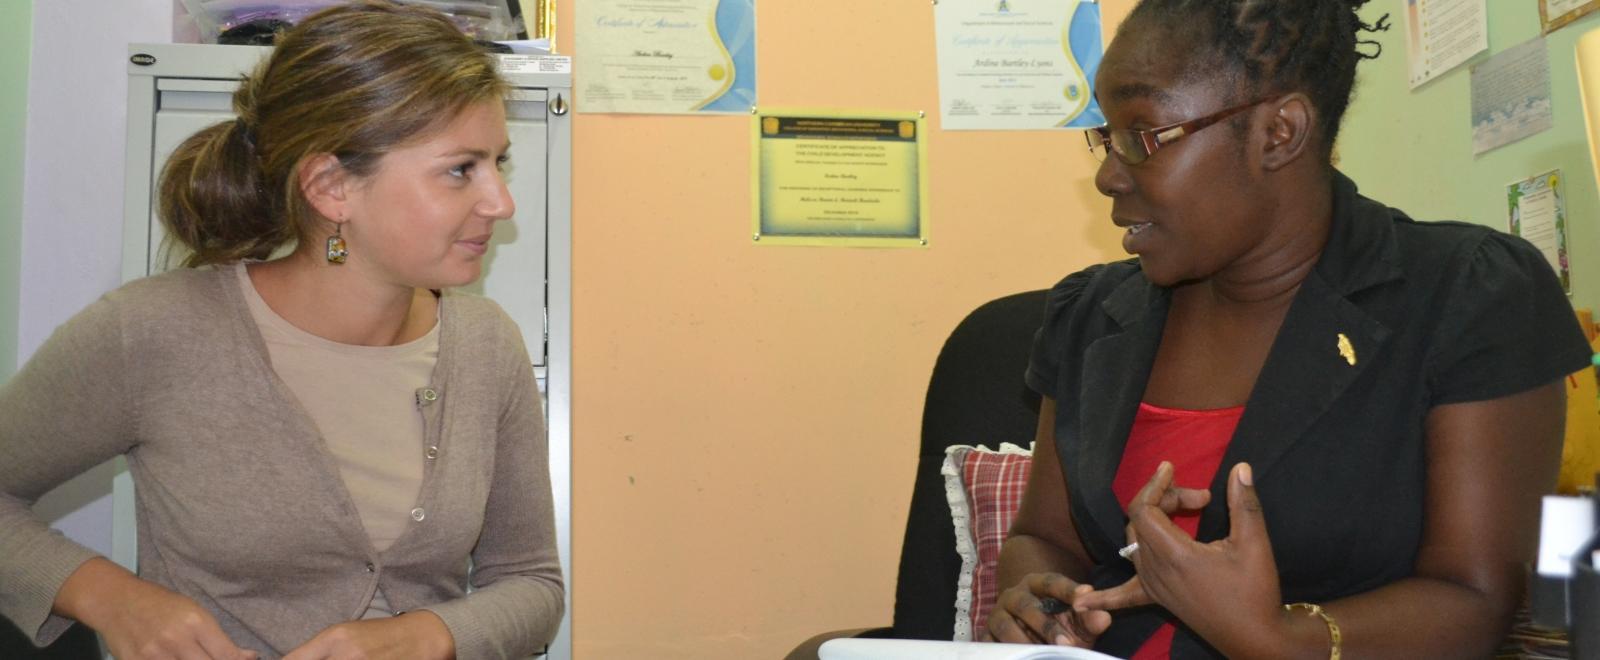 A student doing a Psychology internship in Jamaica with Projects Abroad talks to an experienced psychologist.